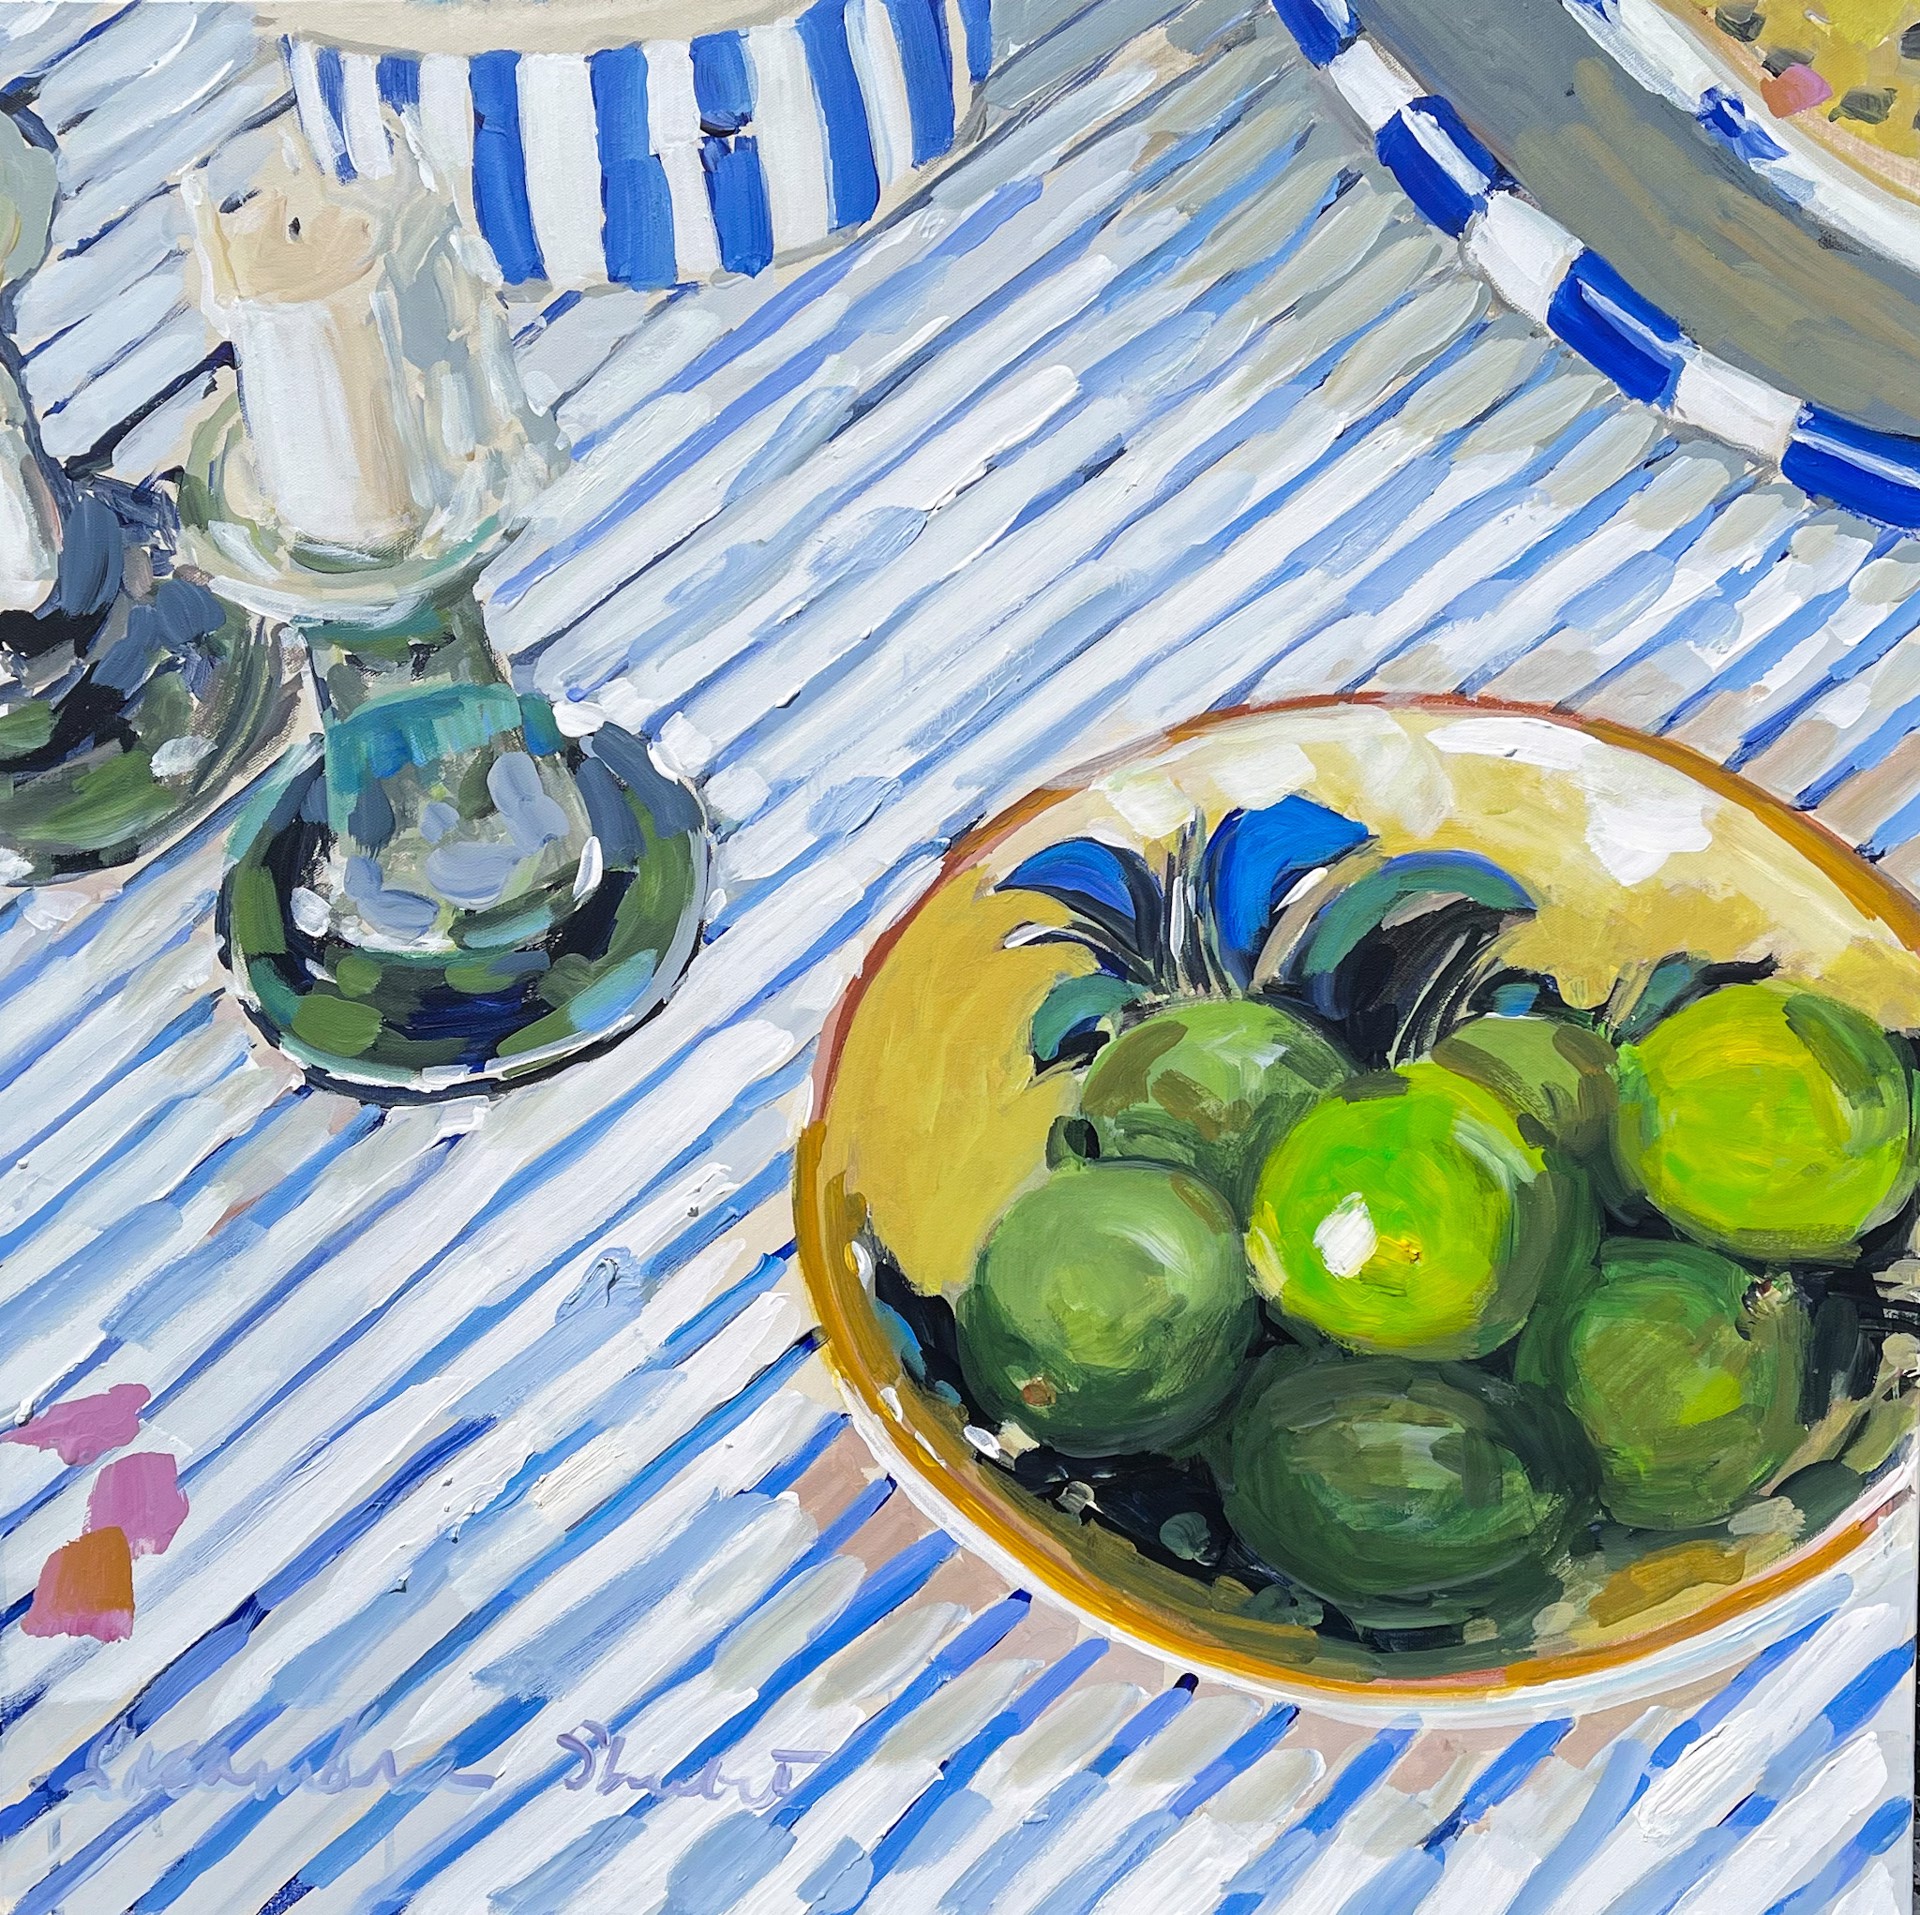 Blue White Stripes and Limes by Laura Lacambra Shubert